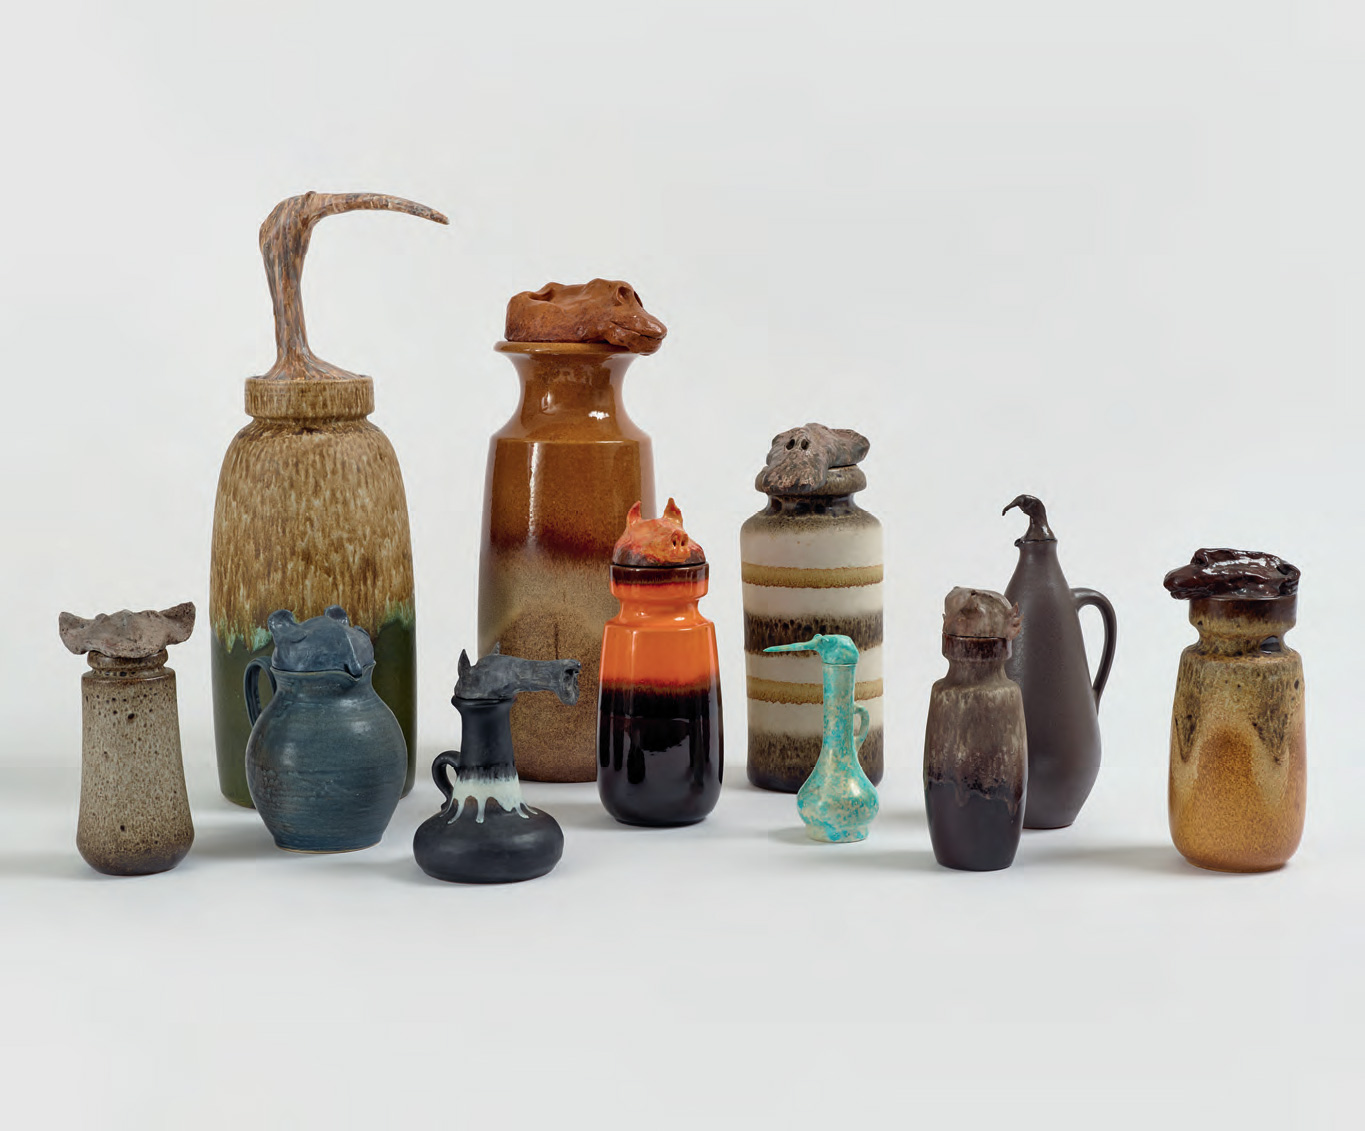 Hari’s Urns, 2004–06, Ceramic, modeling, material, paint. Variable dimensions. Courtesy the artist and Anton Kern Gallery New York and Kate MacGarry, London. Photograph by Anna Arca.